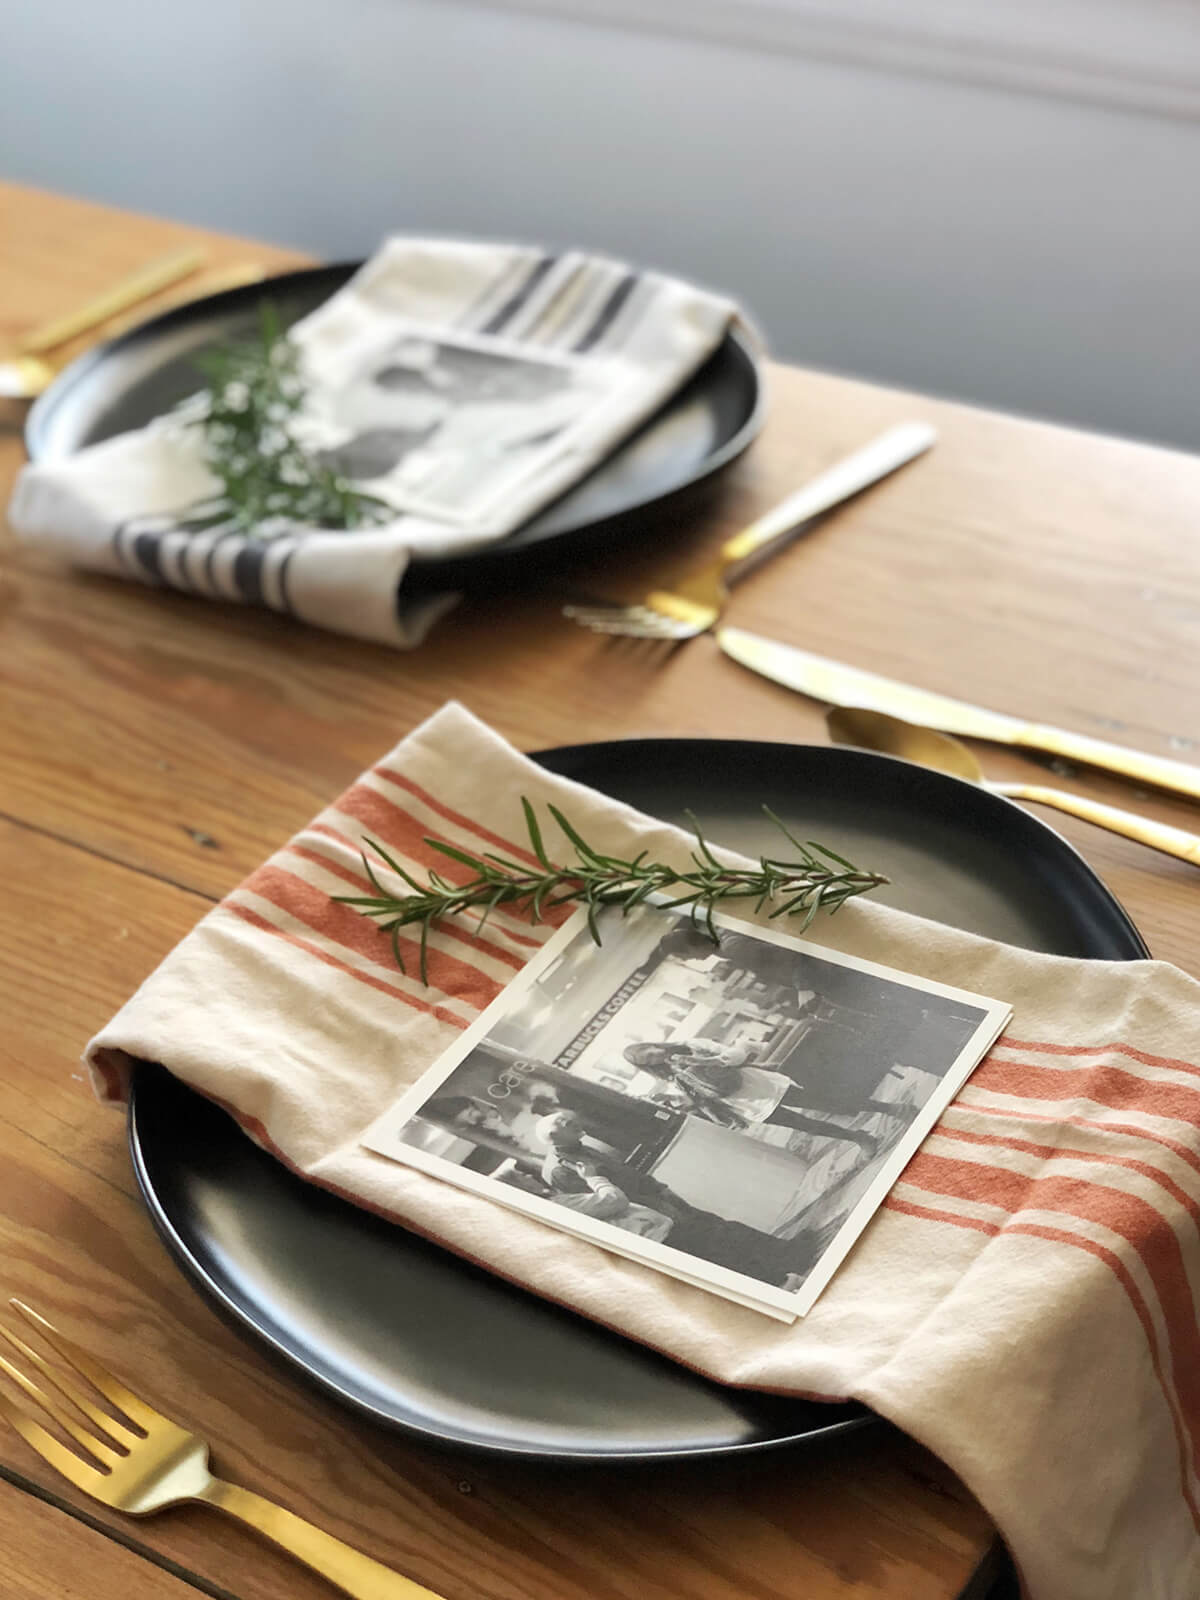 Photos used as table place settings for holiday meal